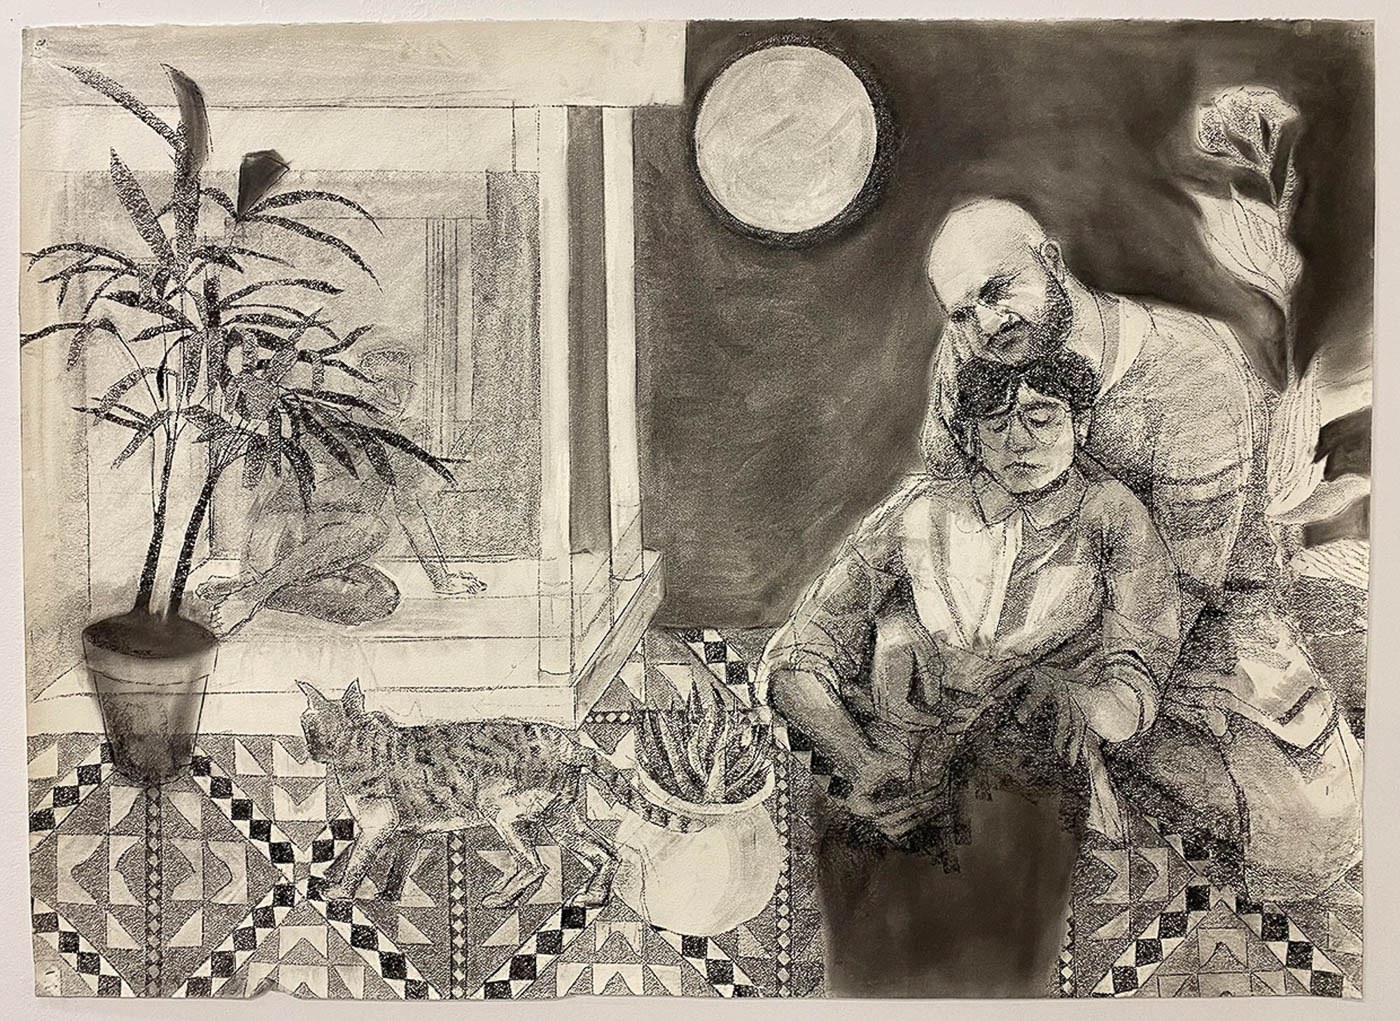 a charcoal drawing of two figures on an outdoor patio